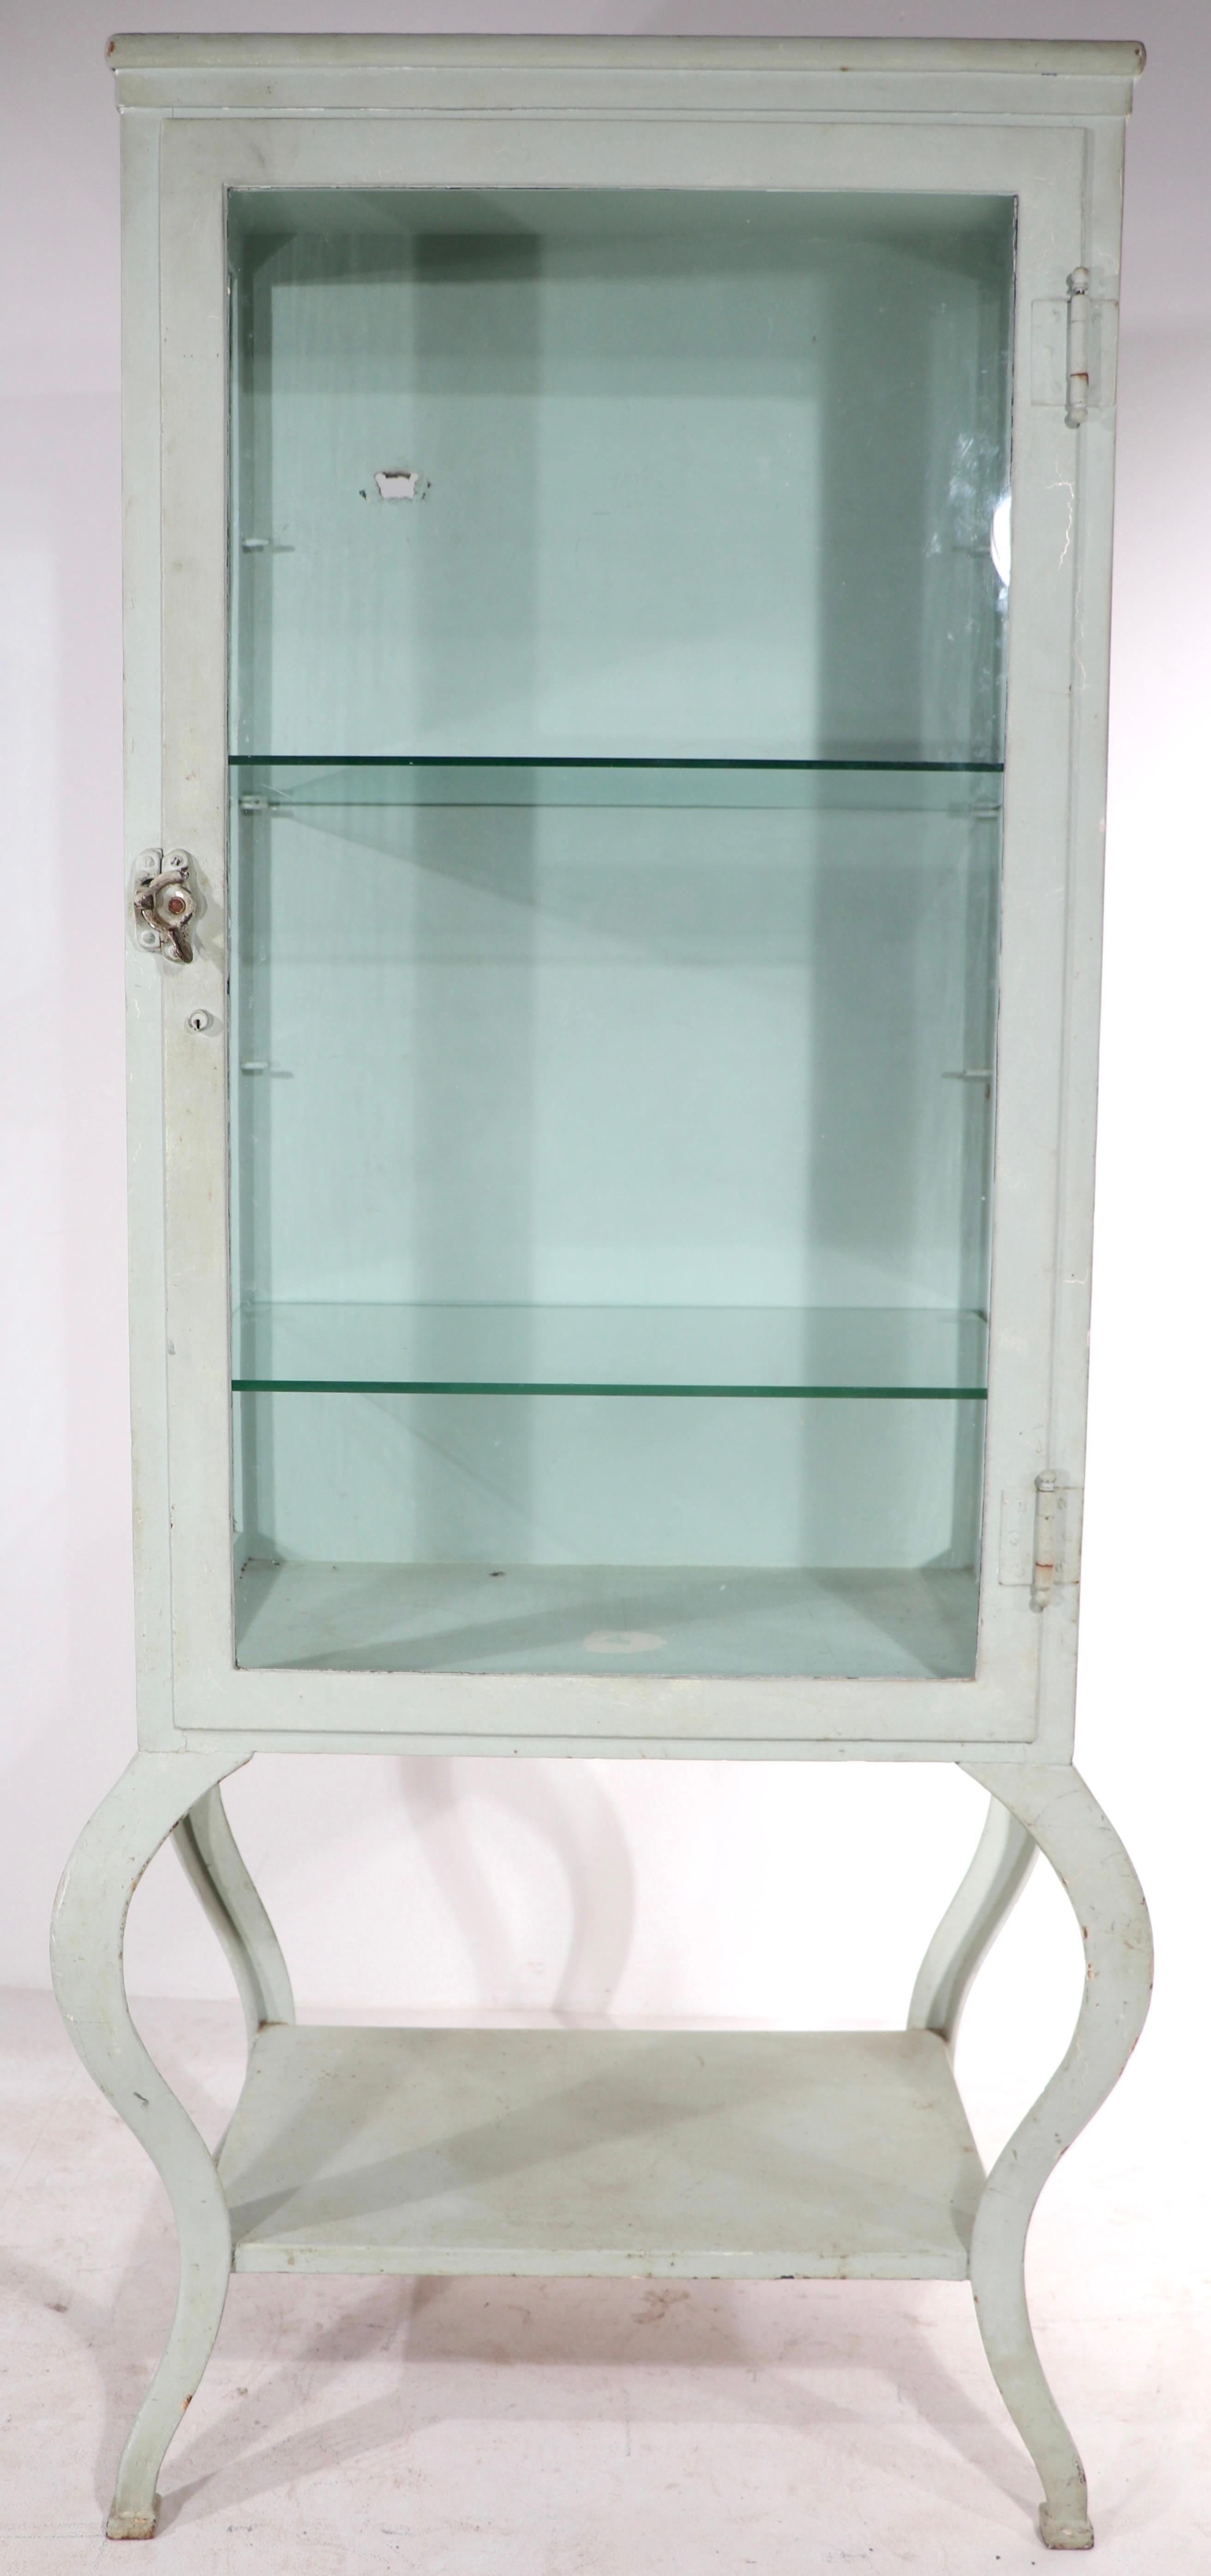 Early 20th C Medical Cabinet Vitrine Display Case 5